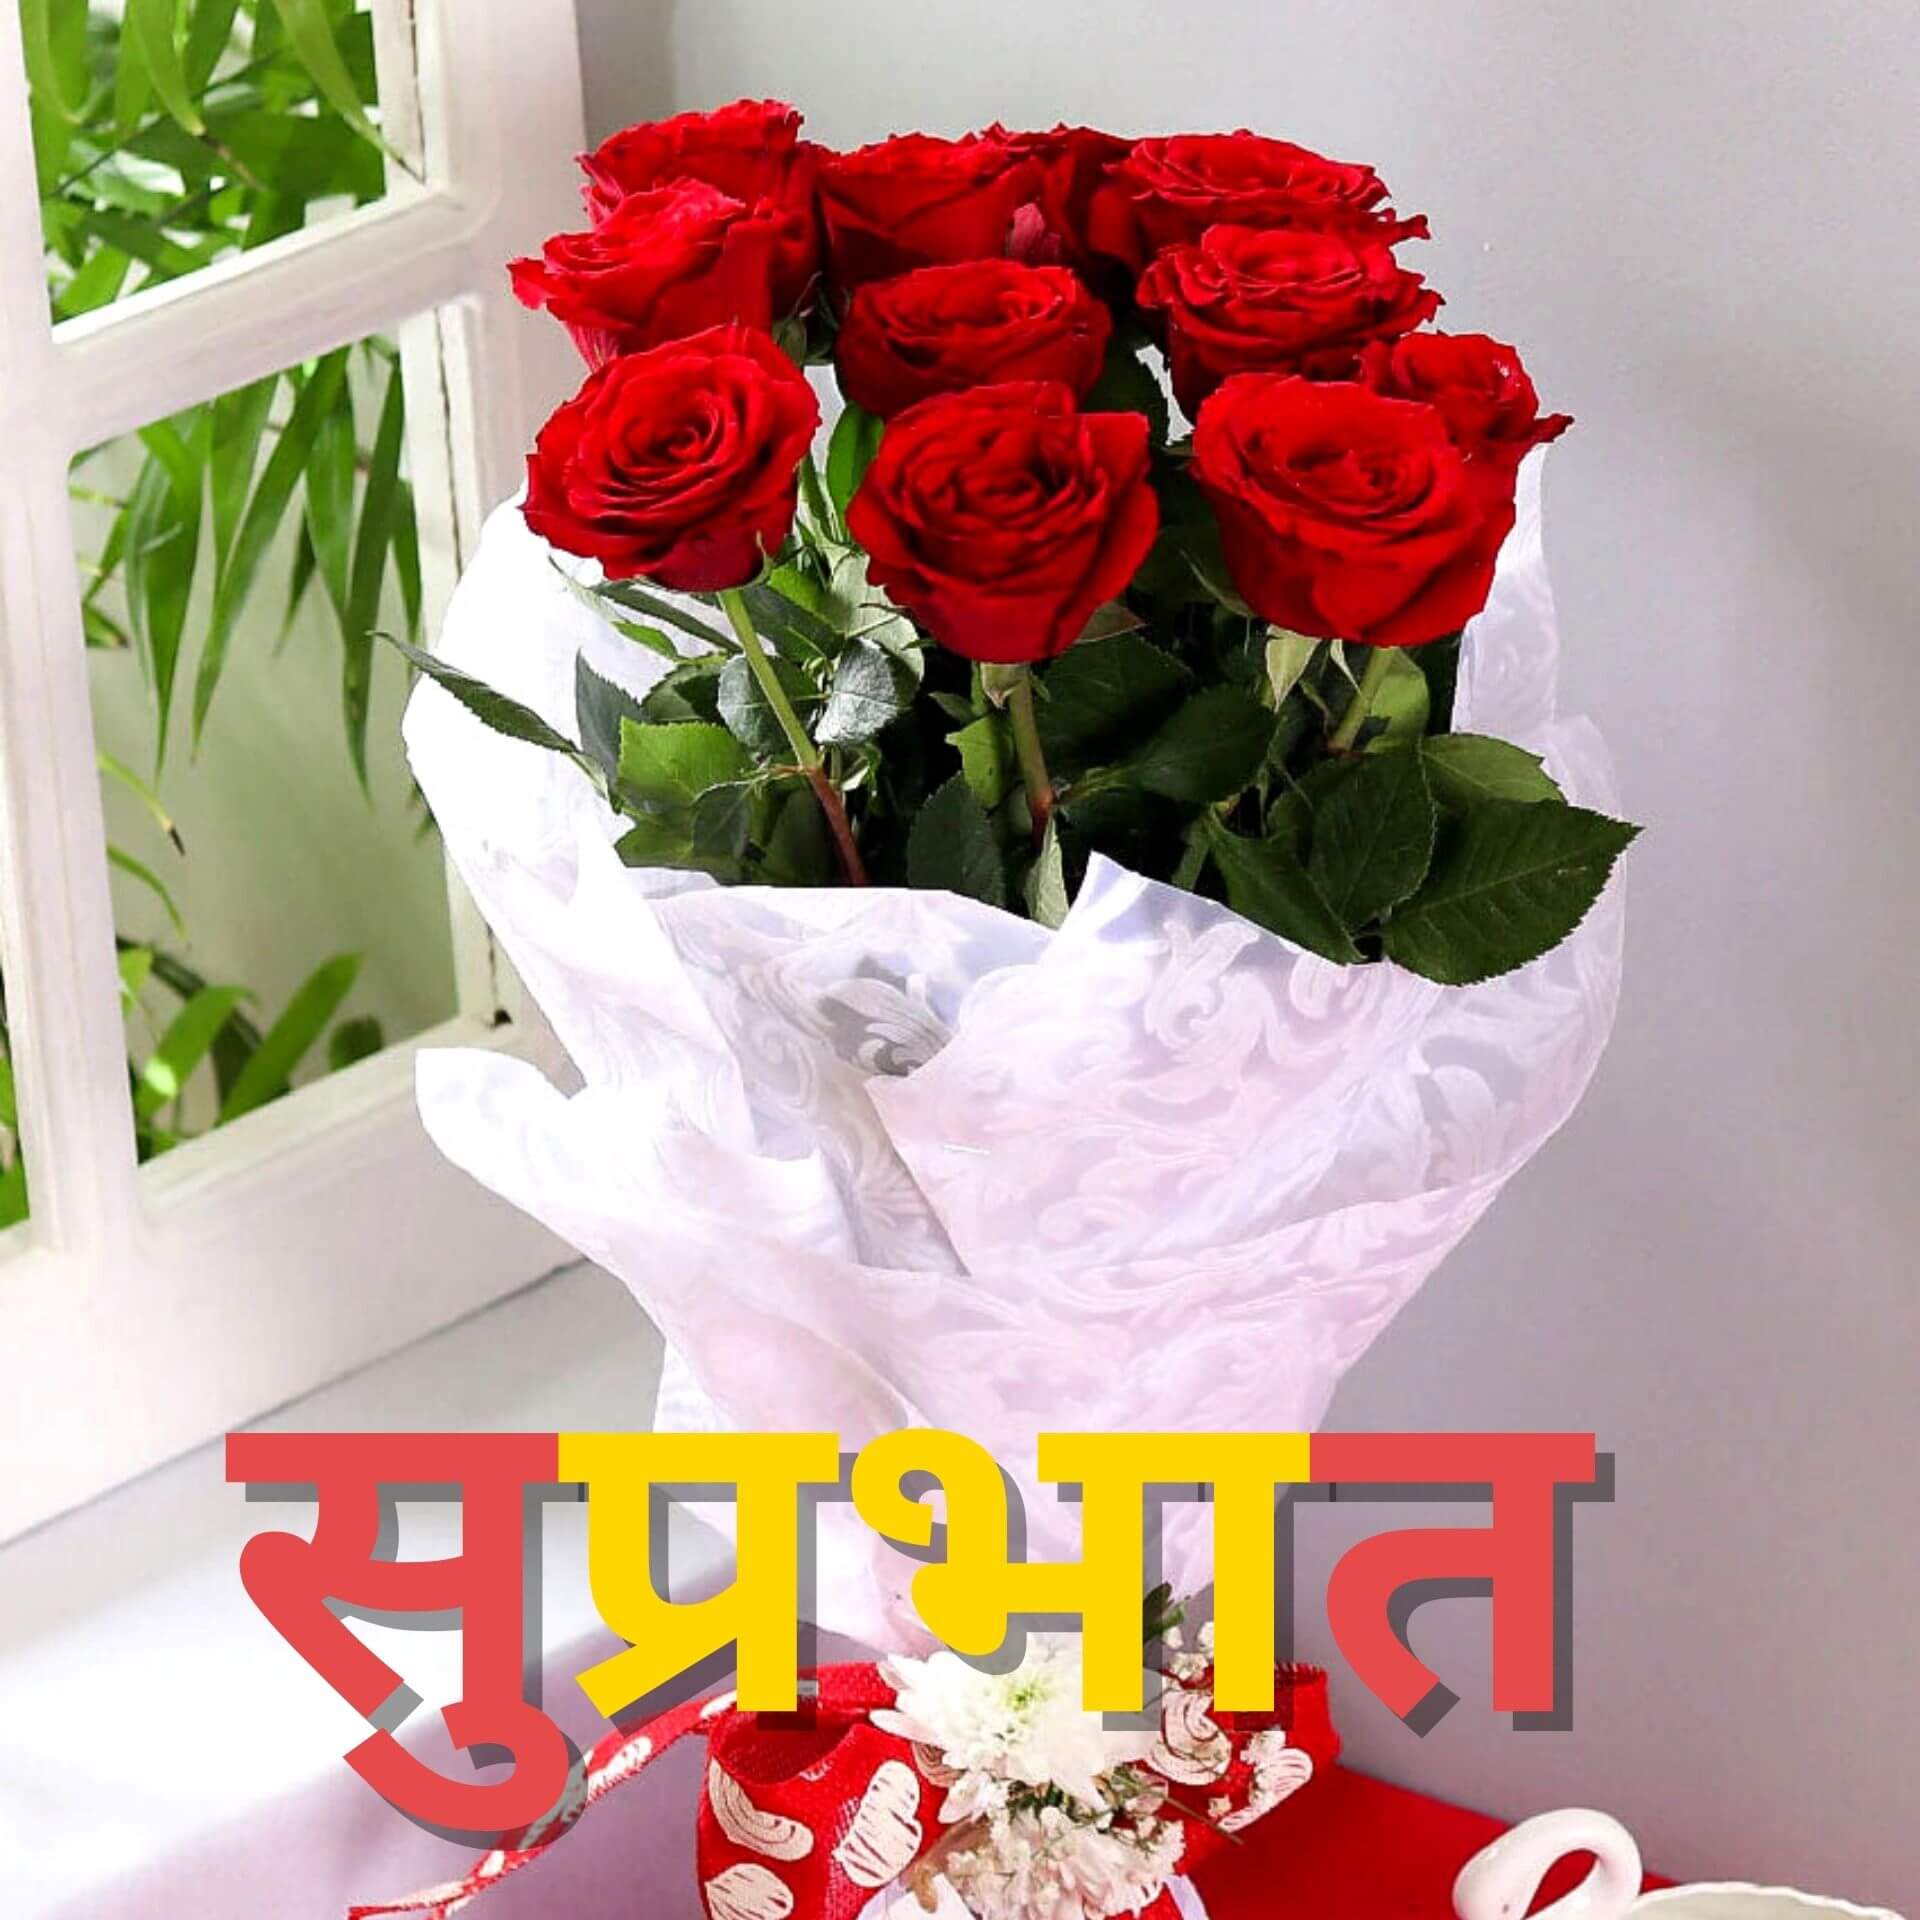 Red Rose Suprabhat Images for Whatsapp